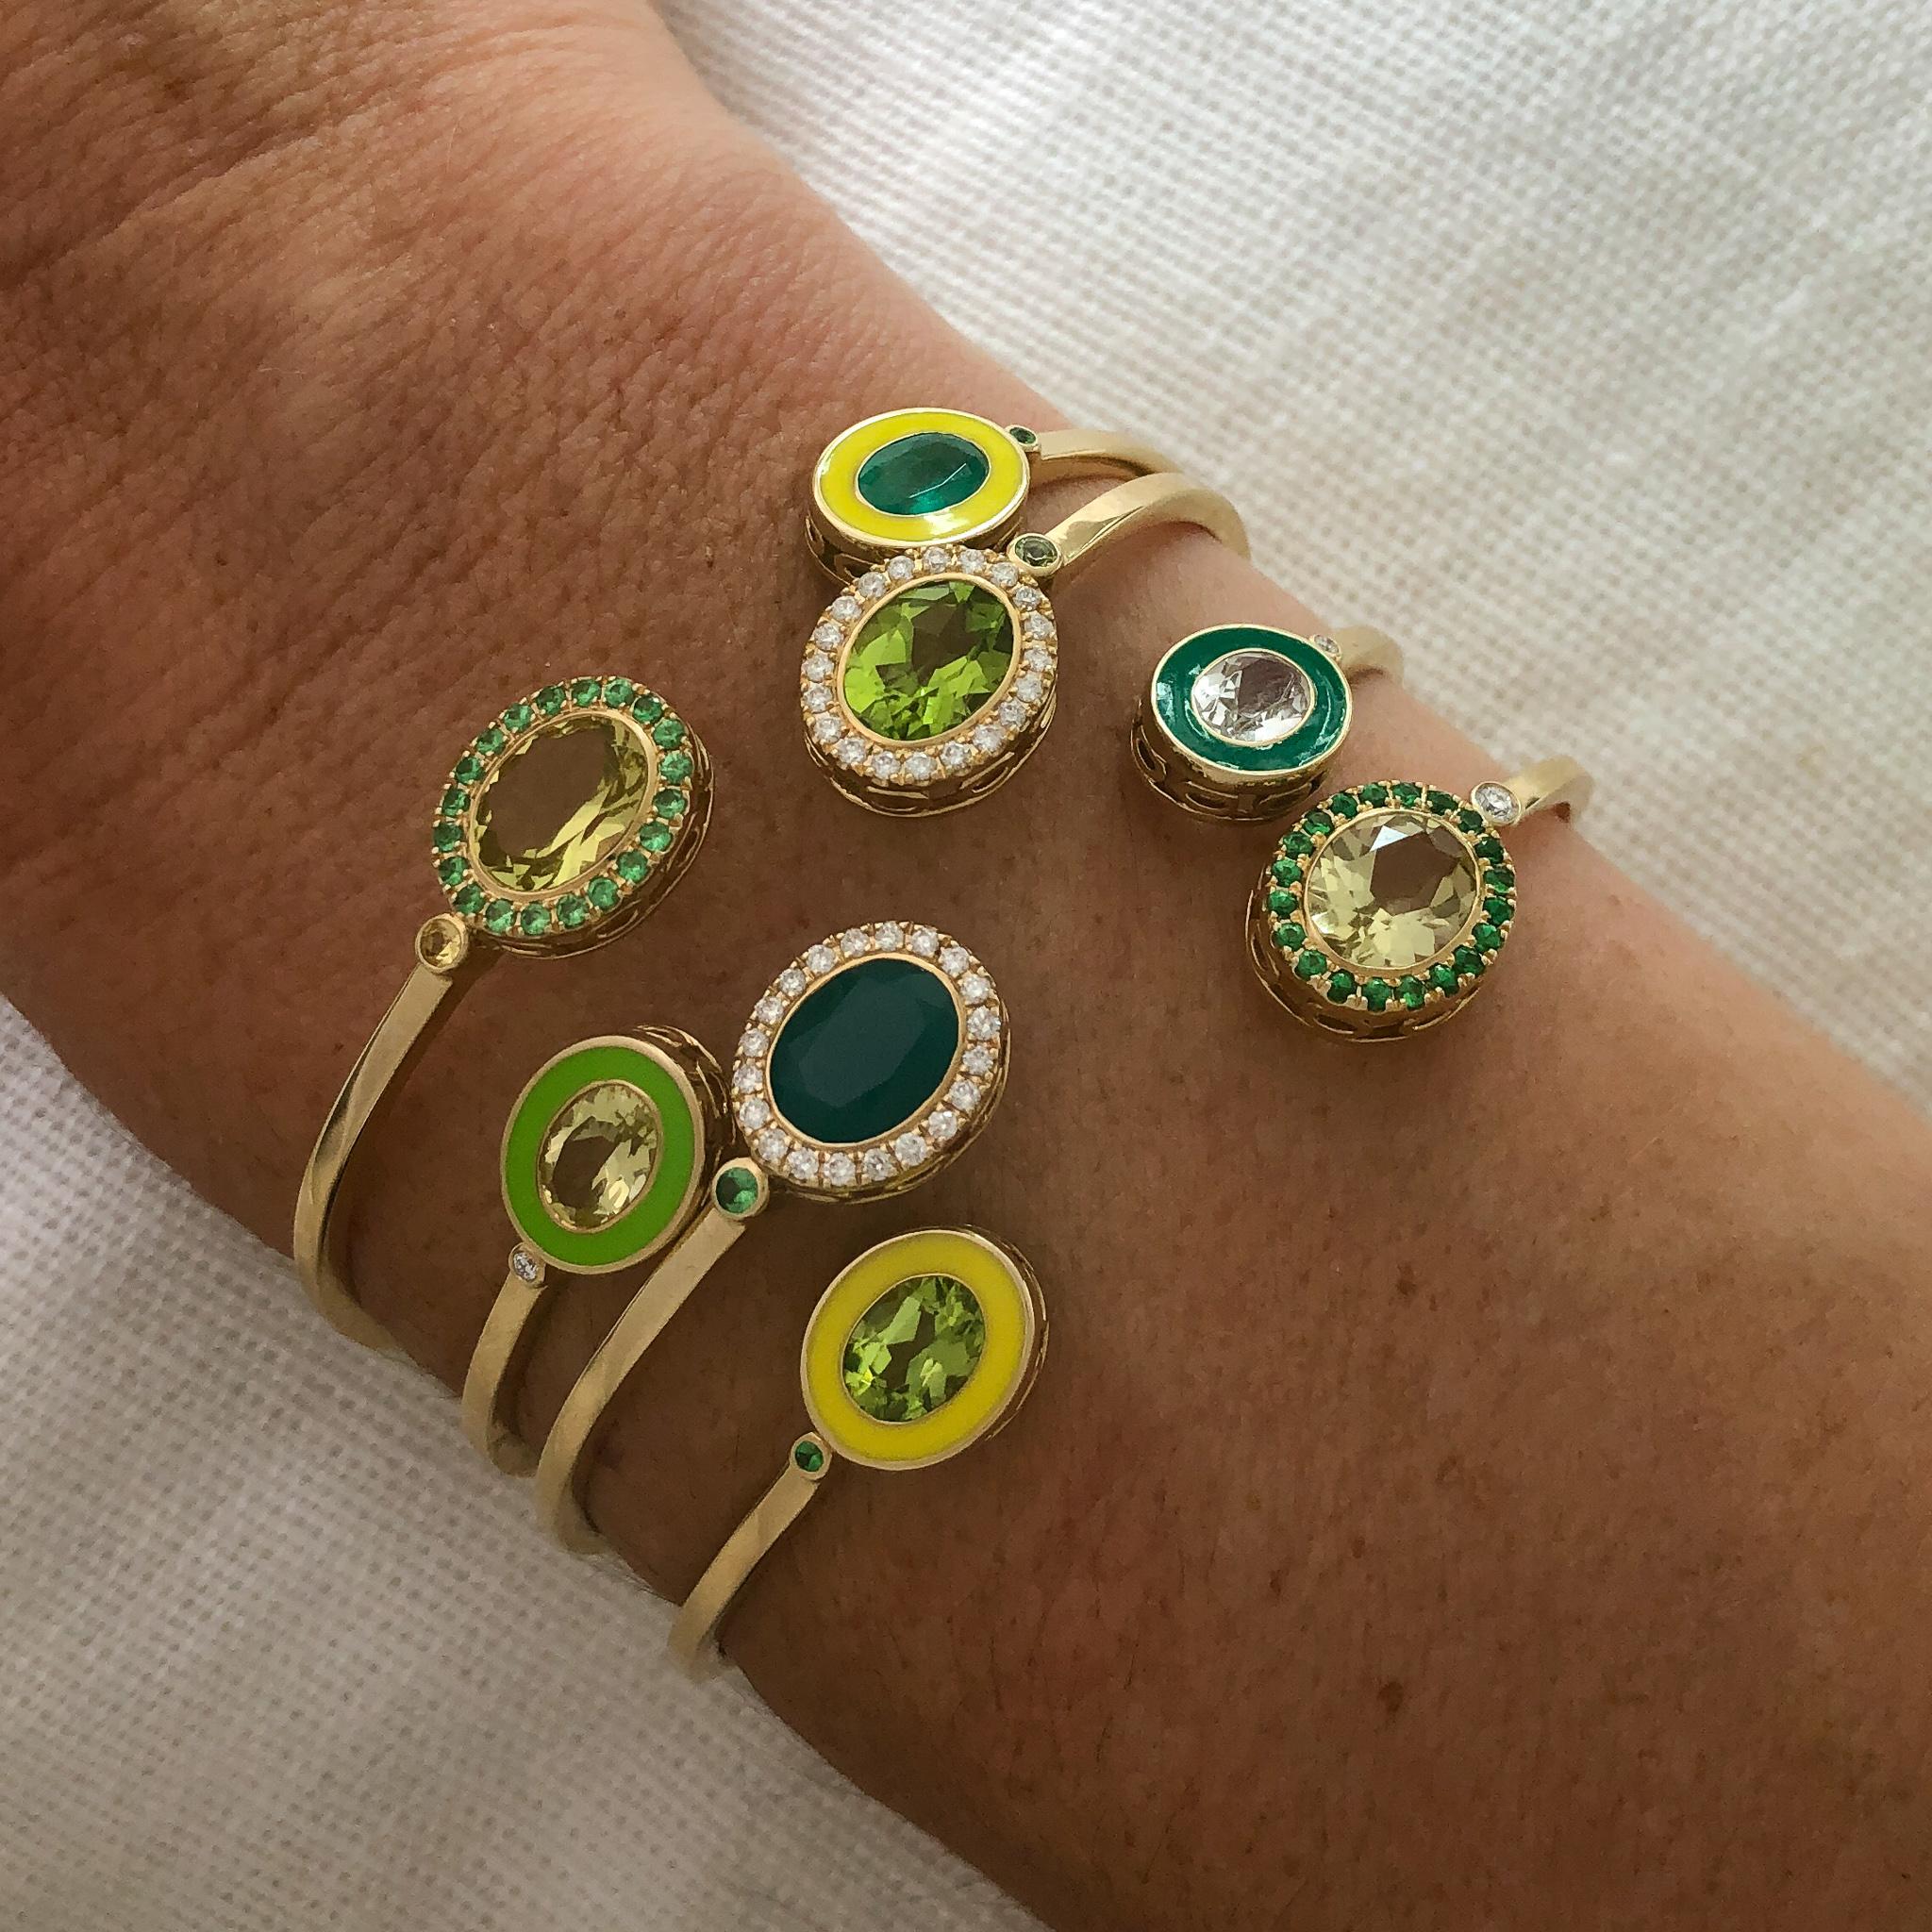 14 Karat Yellow Gold, Enamel, Lemon Citrine and Emerald Cuff Bracelet In New Condition For Sale In Mountain Brook, AL